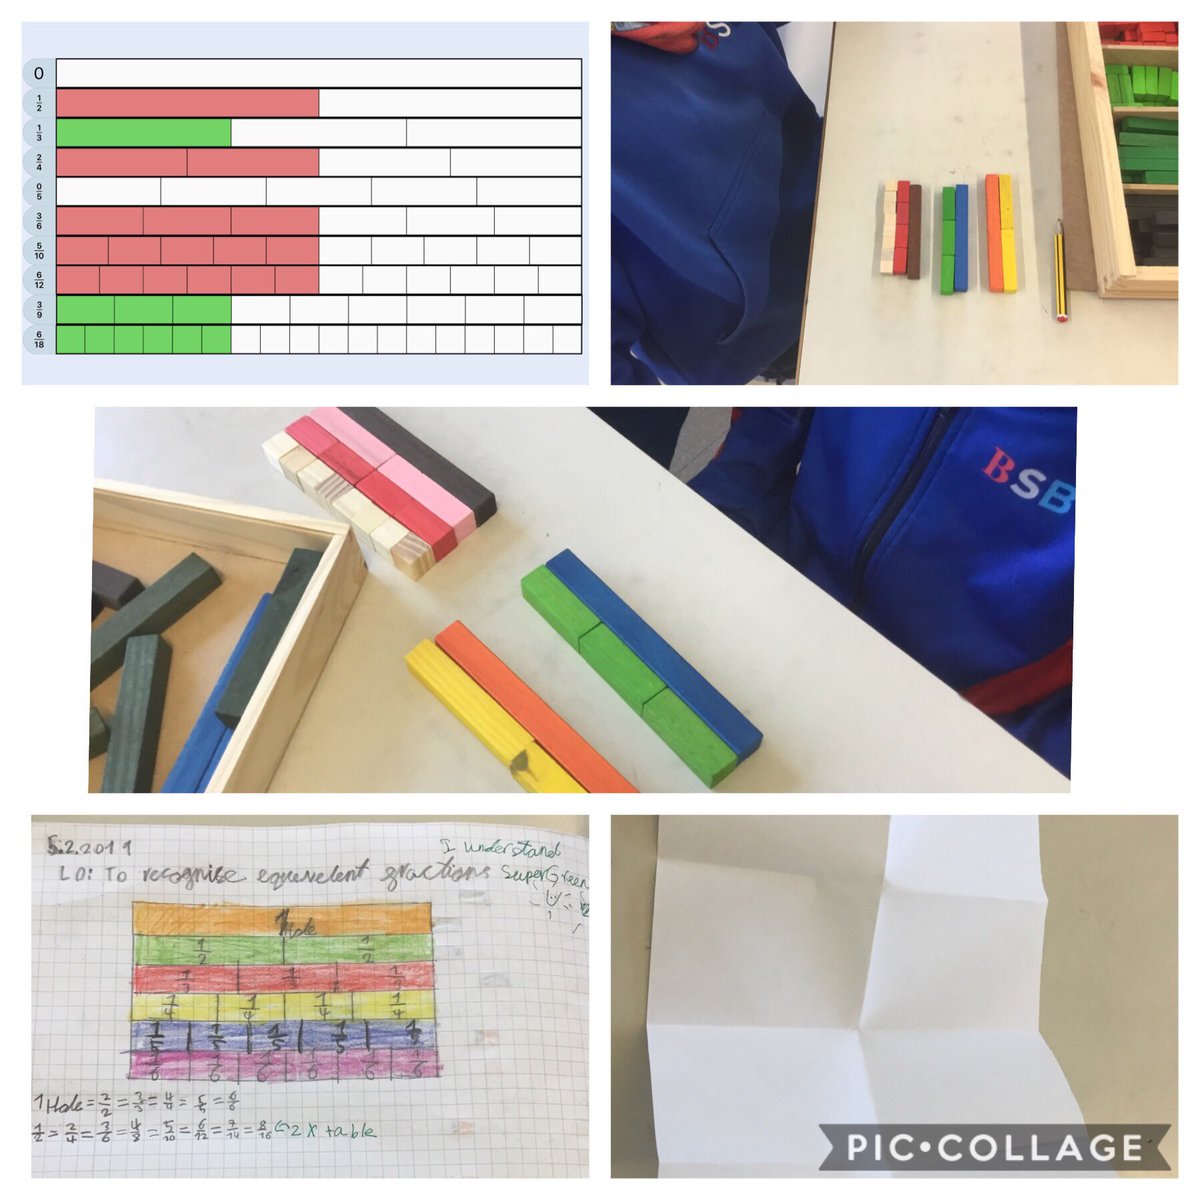 We started fractions today. We folded paper, then used cuisinare rods, moved on to computer representations before drawing our own fraction walls and noting down some equivalent fractions. #mathsisfun #Y5DRAGONS @BSB_Barcelona